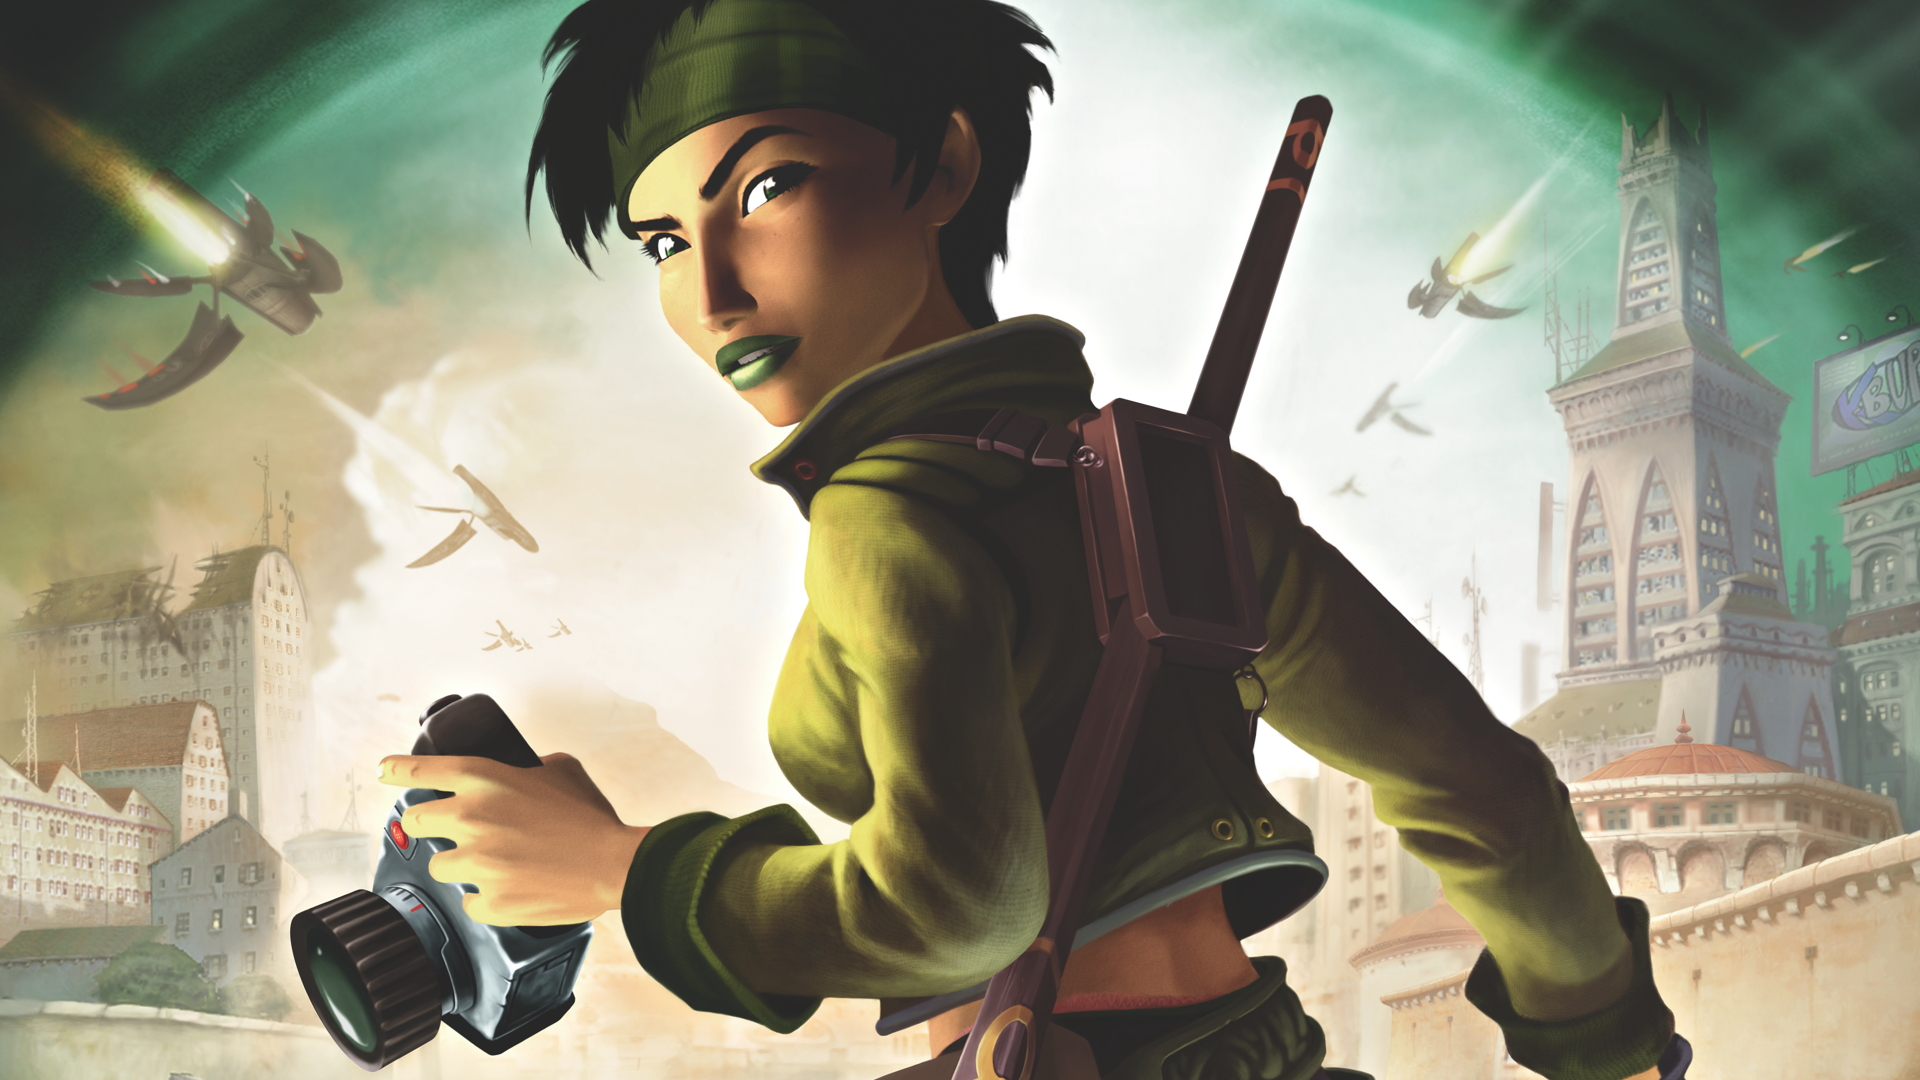 beyond good and evil book review